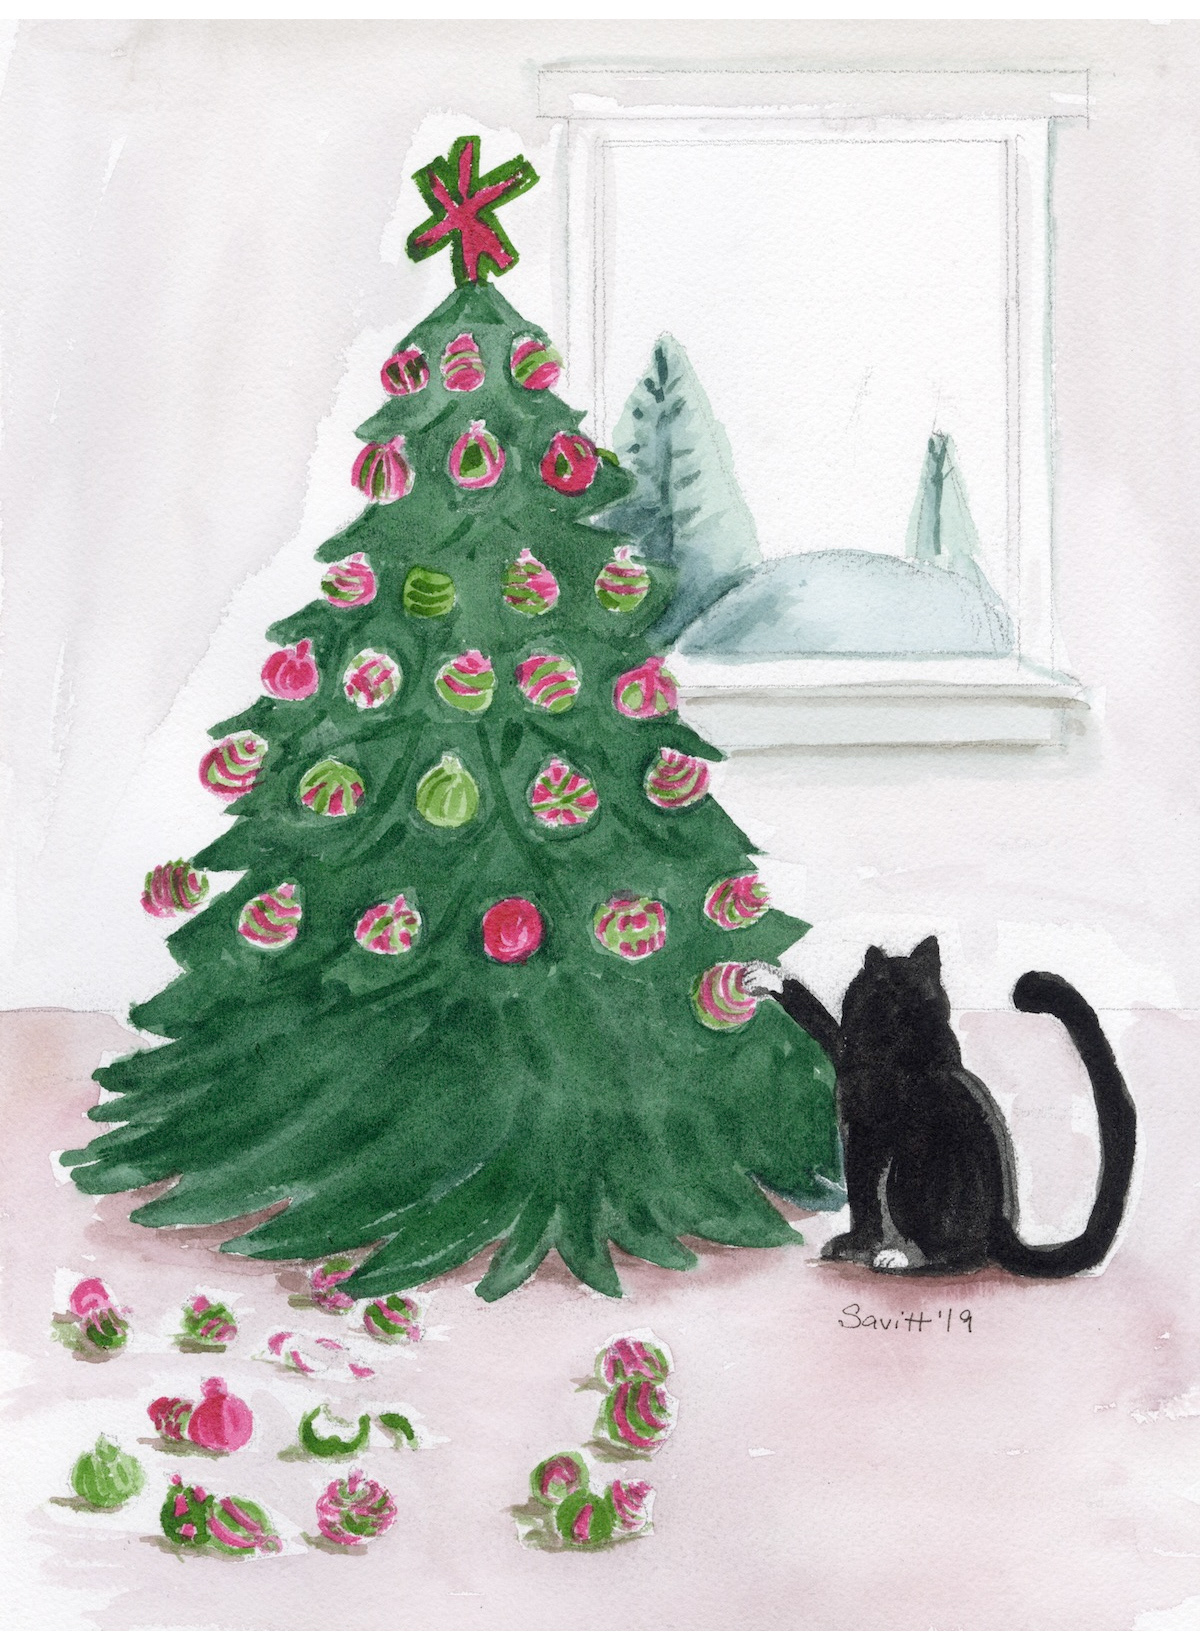 A humorous image of a tuxedo cat knocking ornaments off of a Christmas tree
